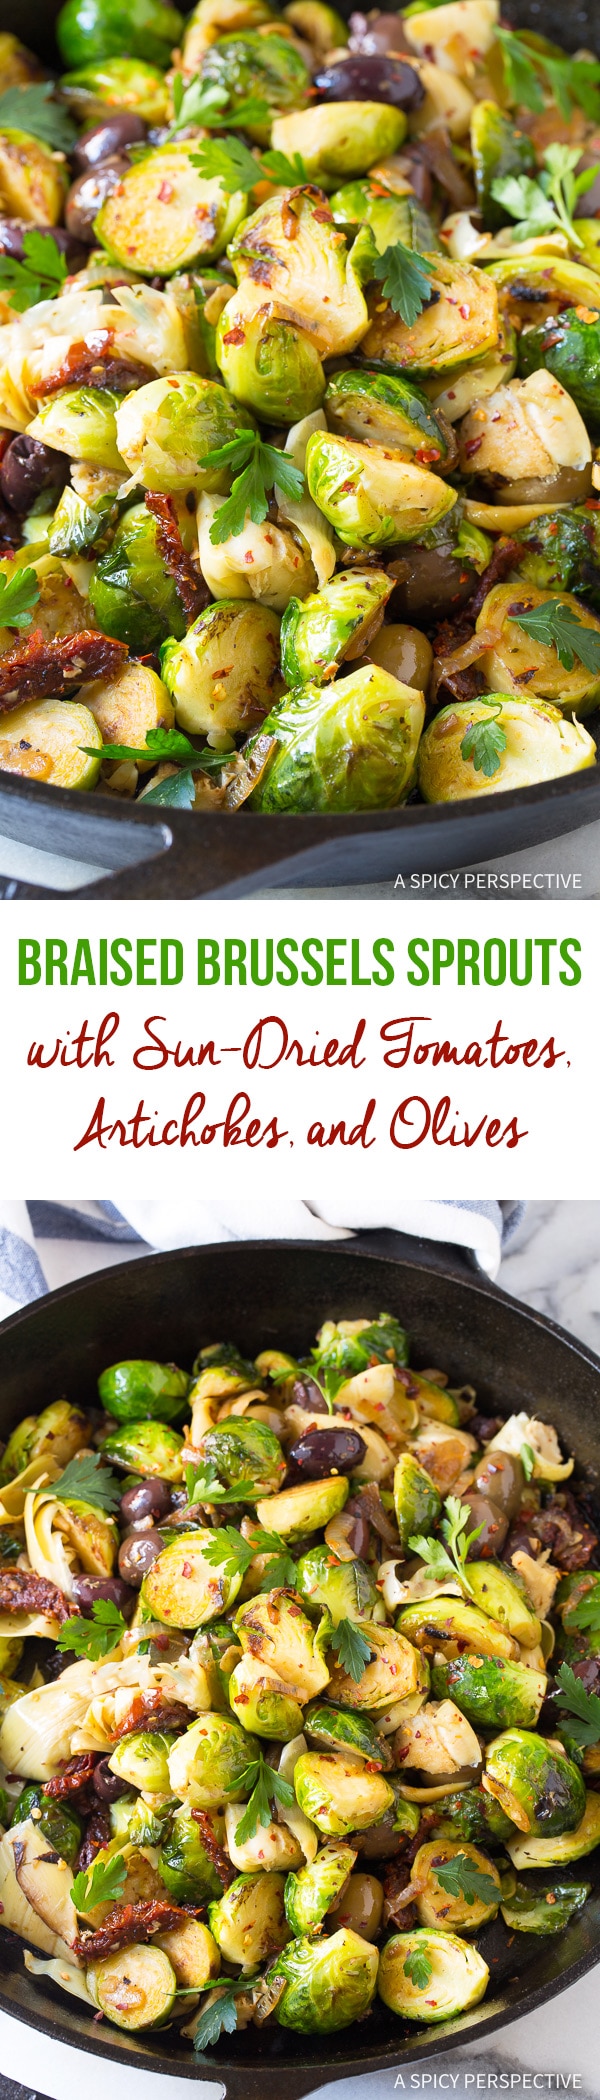 Braised Brussels Sprouts with Sun-Dried Tomatoes, Artichokes, and Olives Recipe